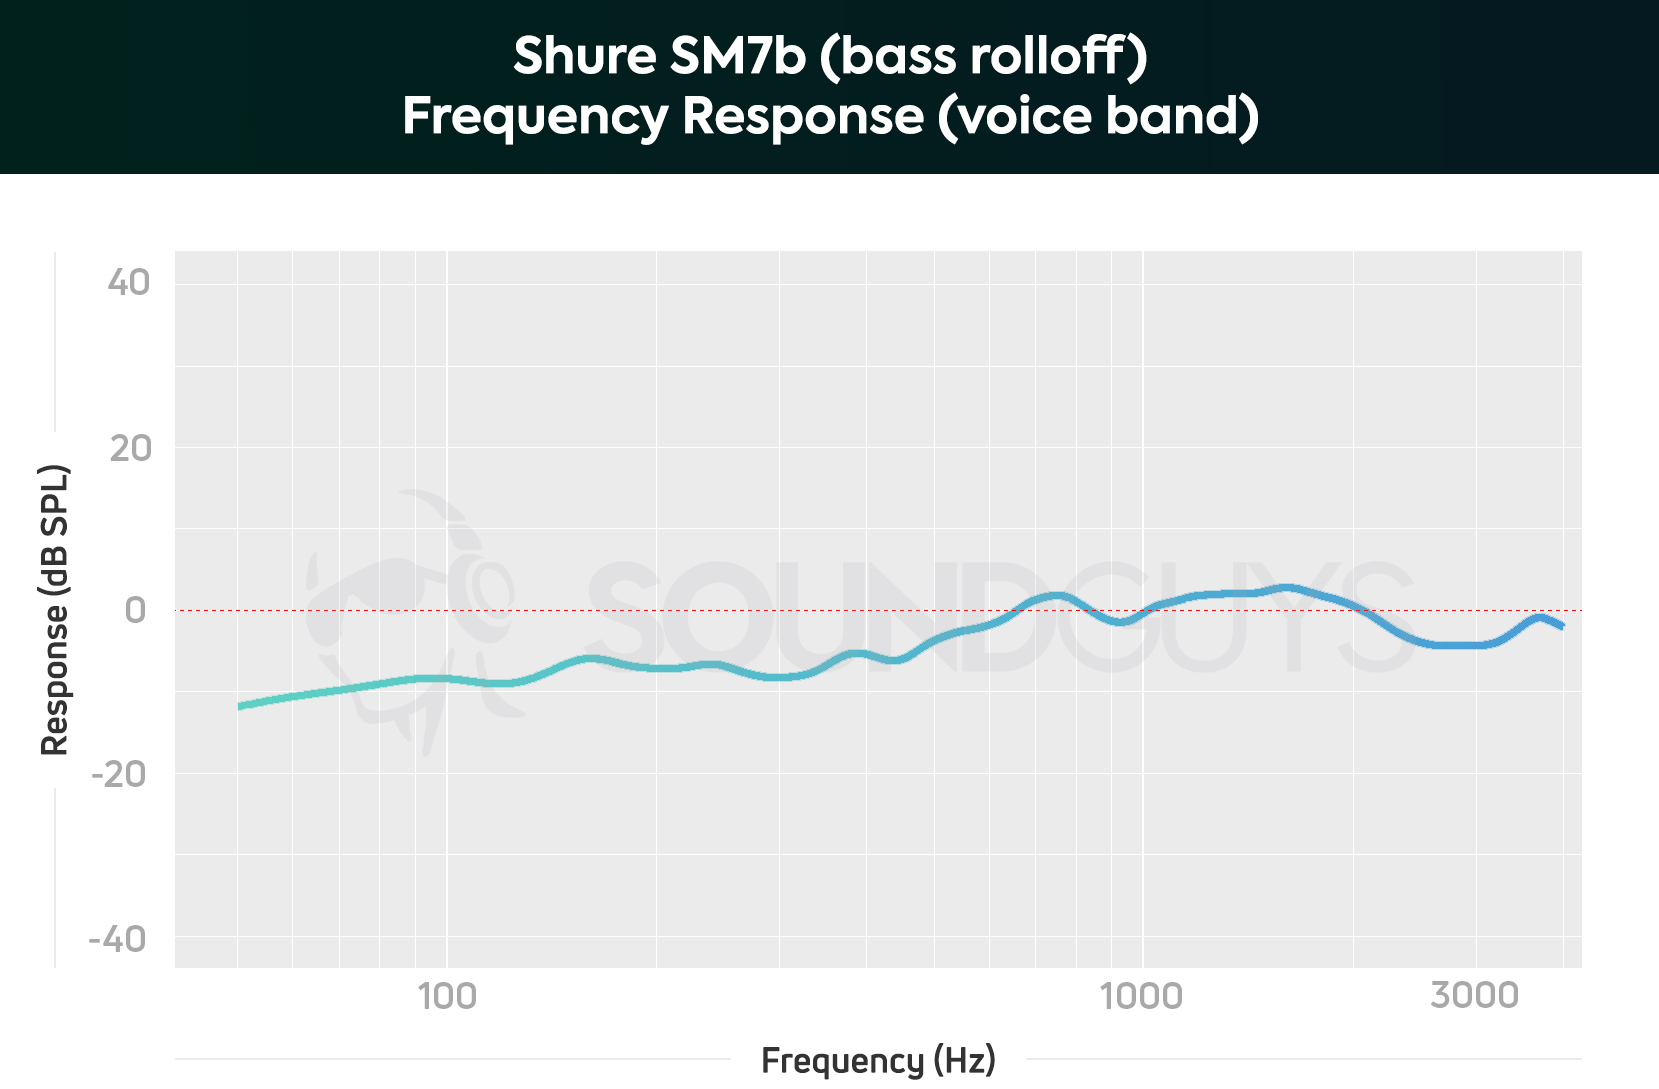 A chart depicting the Shure SM7B dynamic microphone frequency response limited to the human voice band with bass rolloff recording mode on.